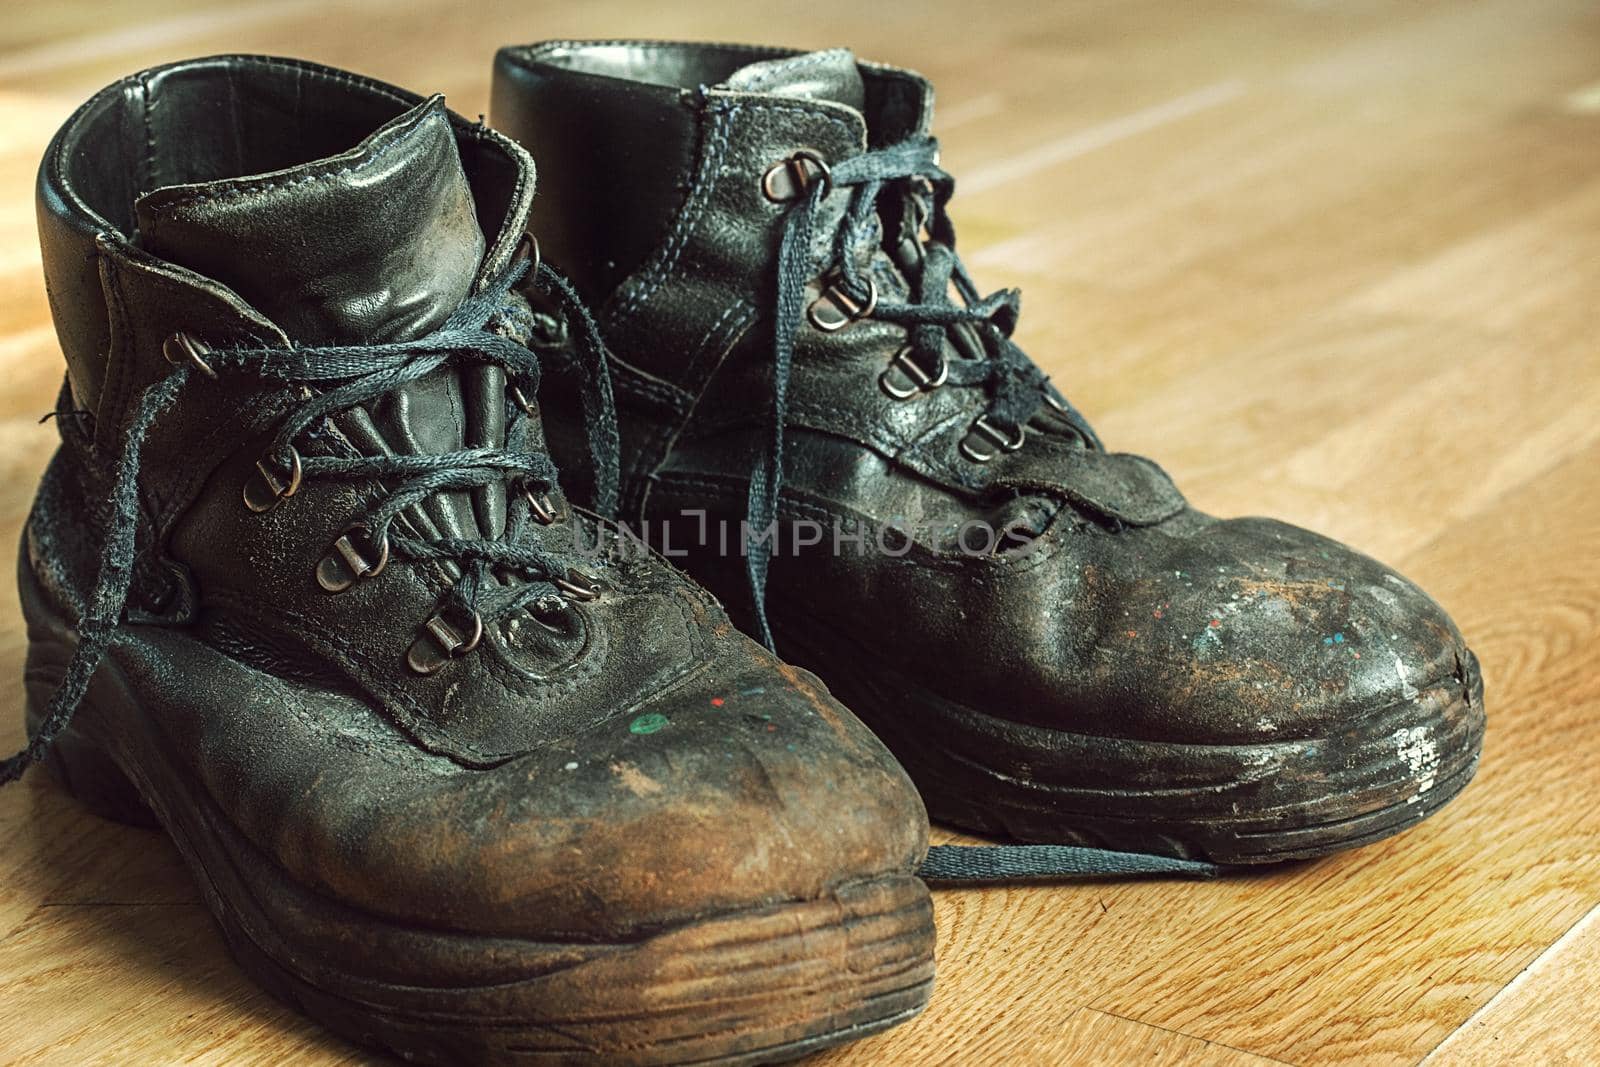 Old worn work boots with lacing. Leather shoes that require repair or replacement. Closeup